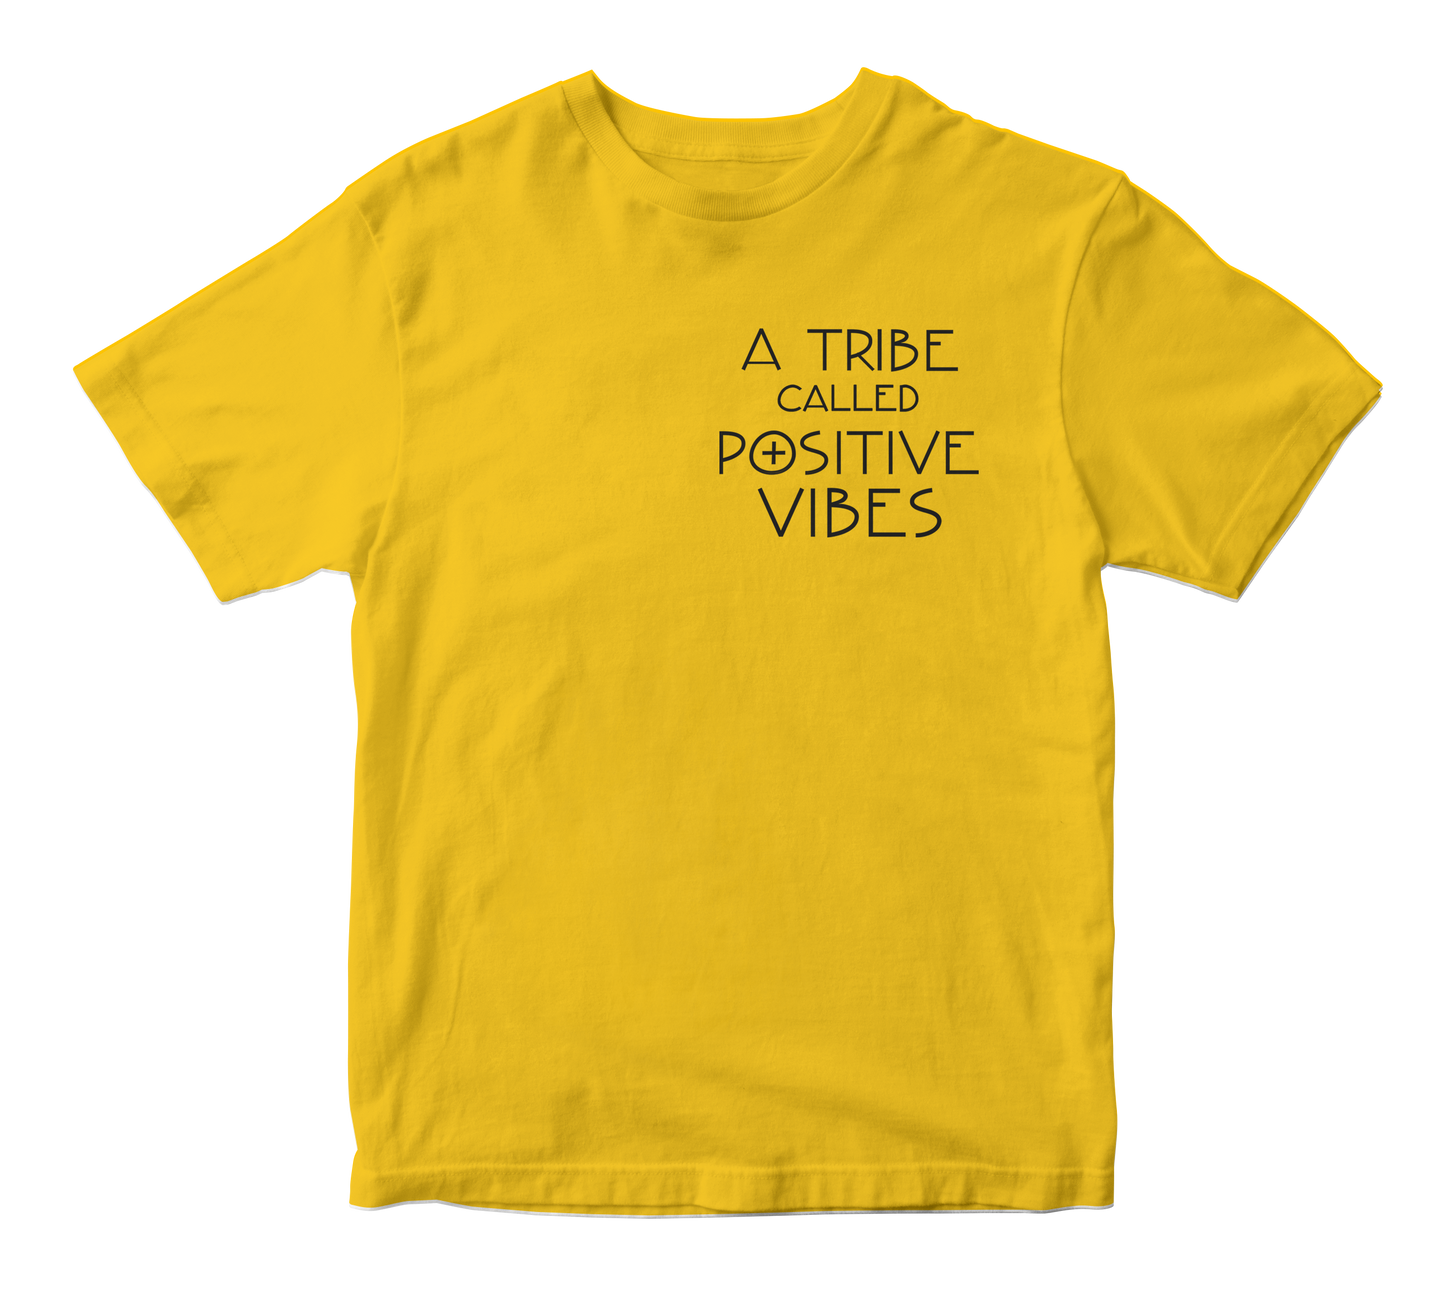 A Tribe Called Positive Vibes Short Sleeve T-shirt